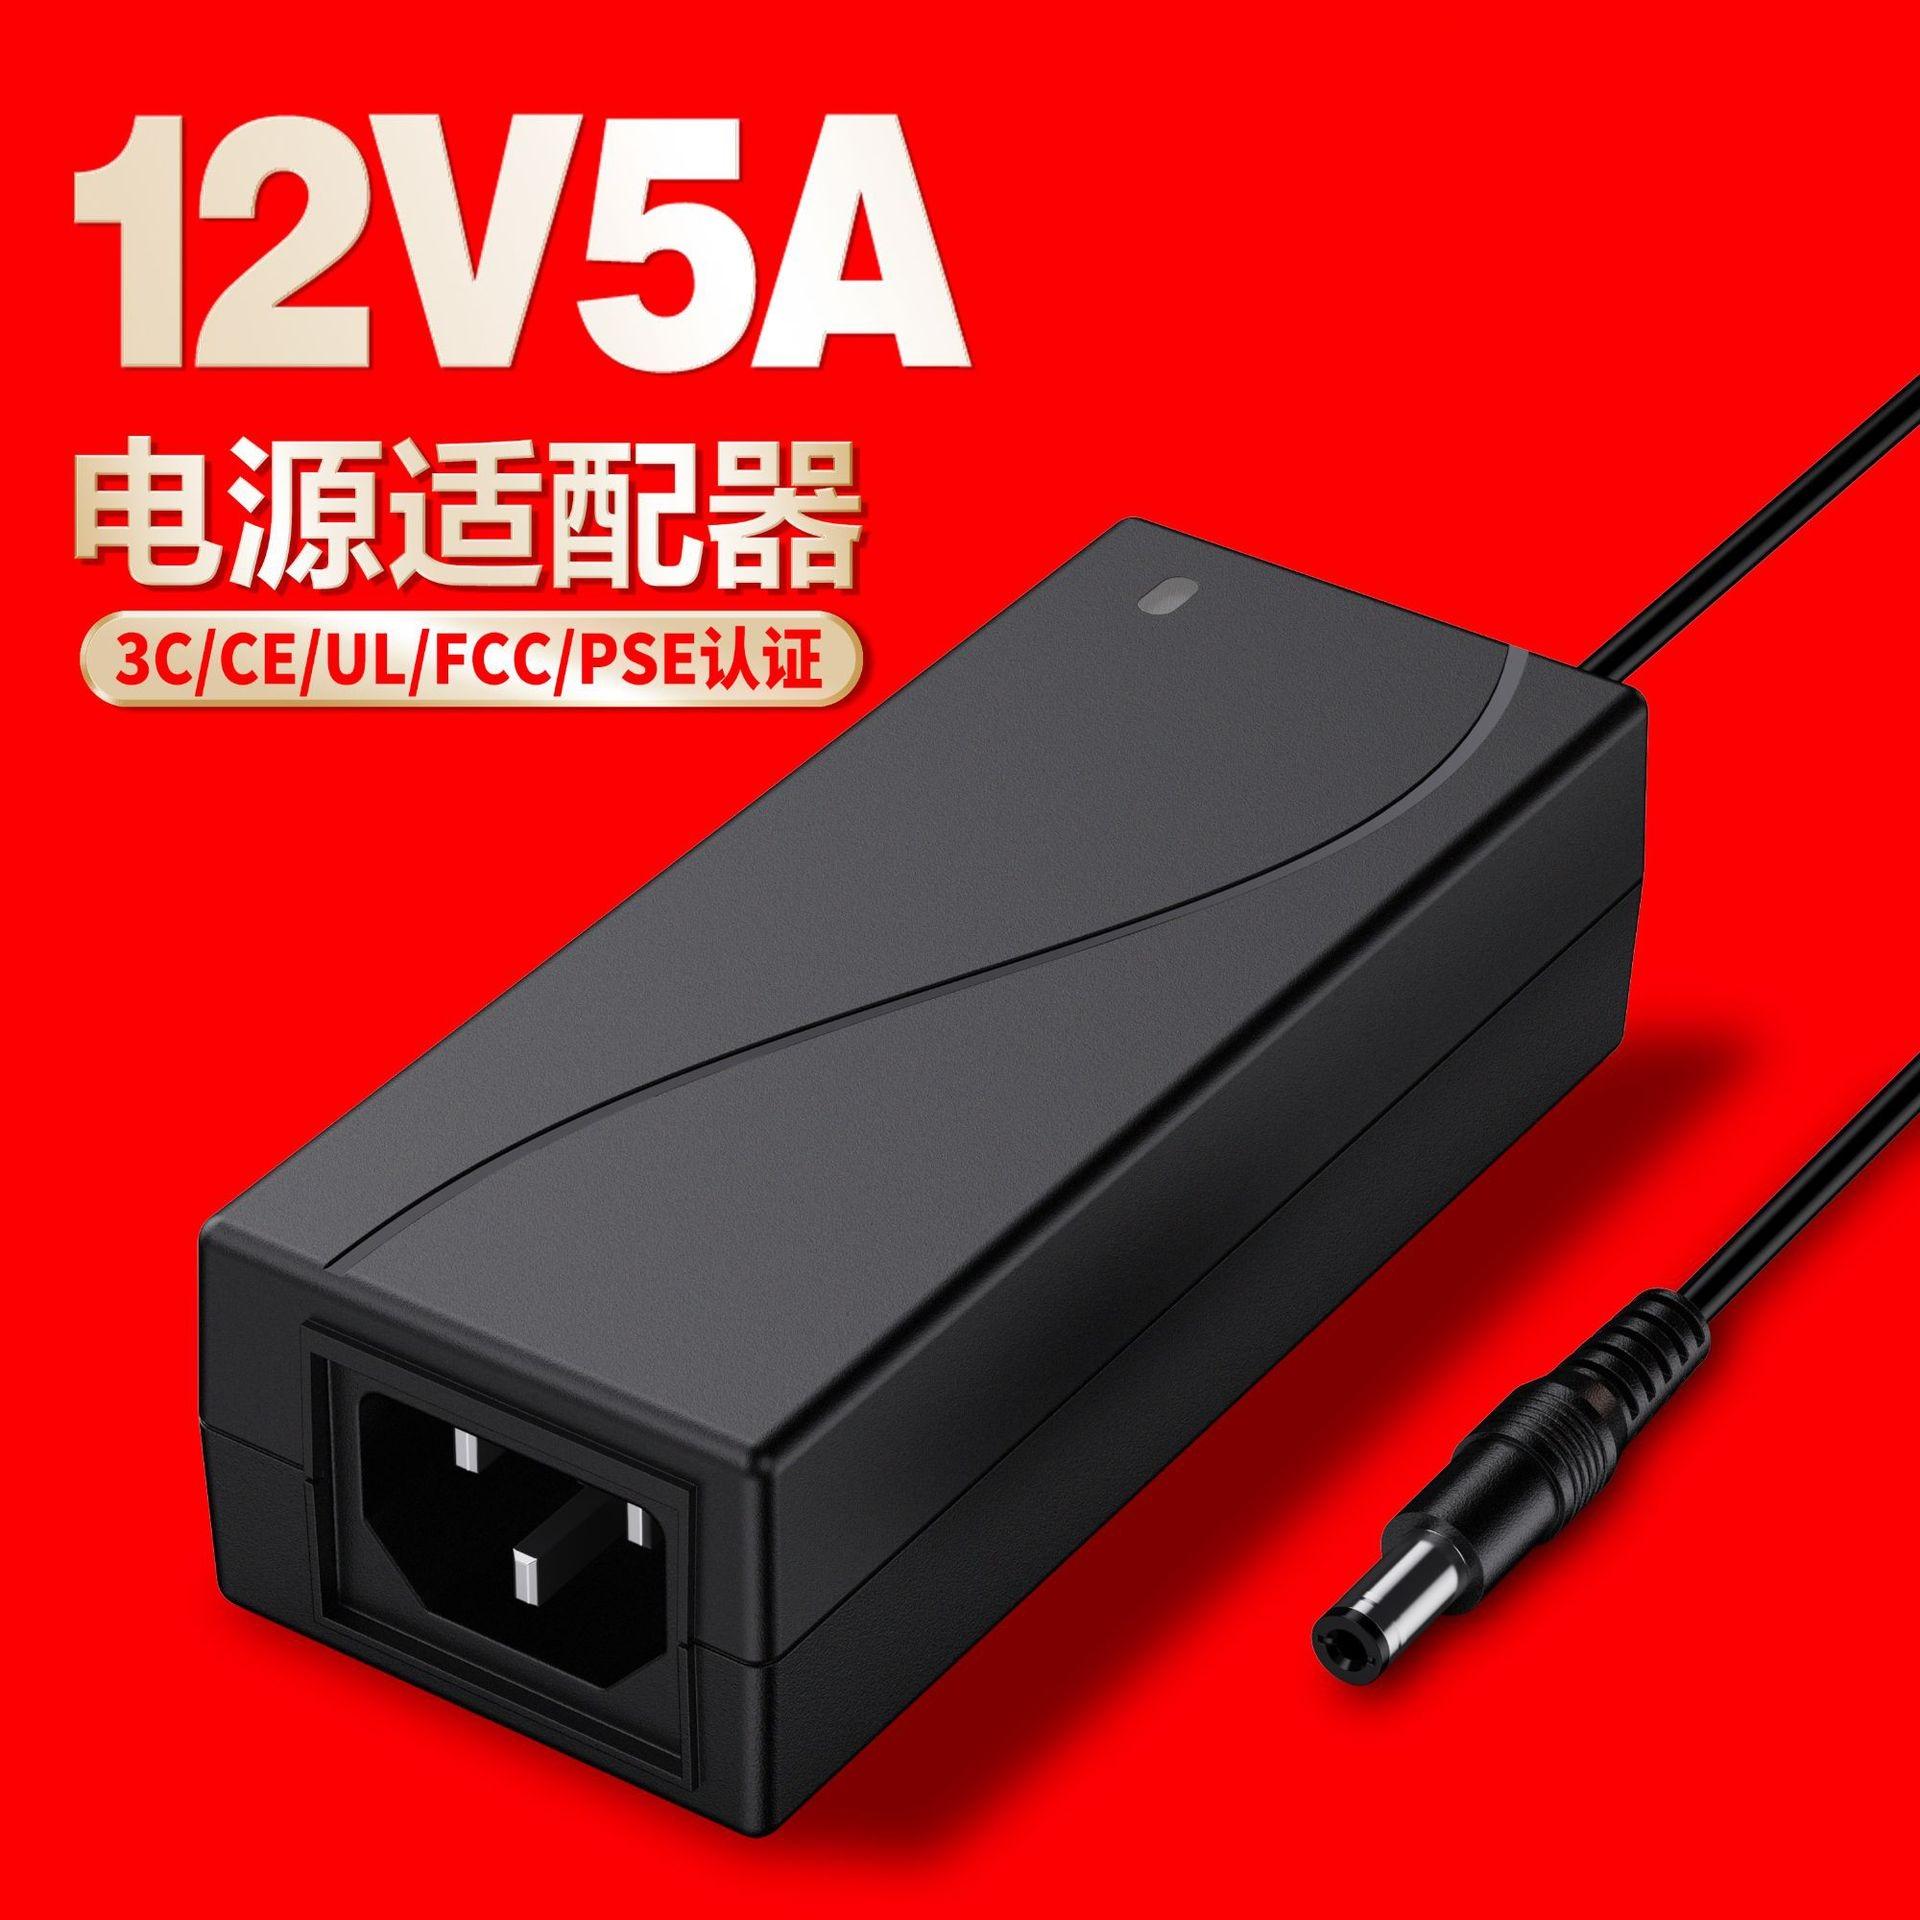 black universal AC 12V 5A 60W DC desktop power adapter with power cord and male barrel connector for laptop